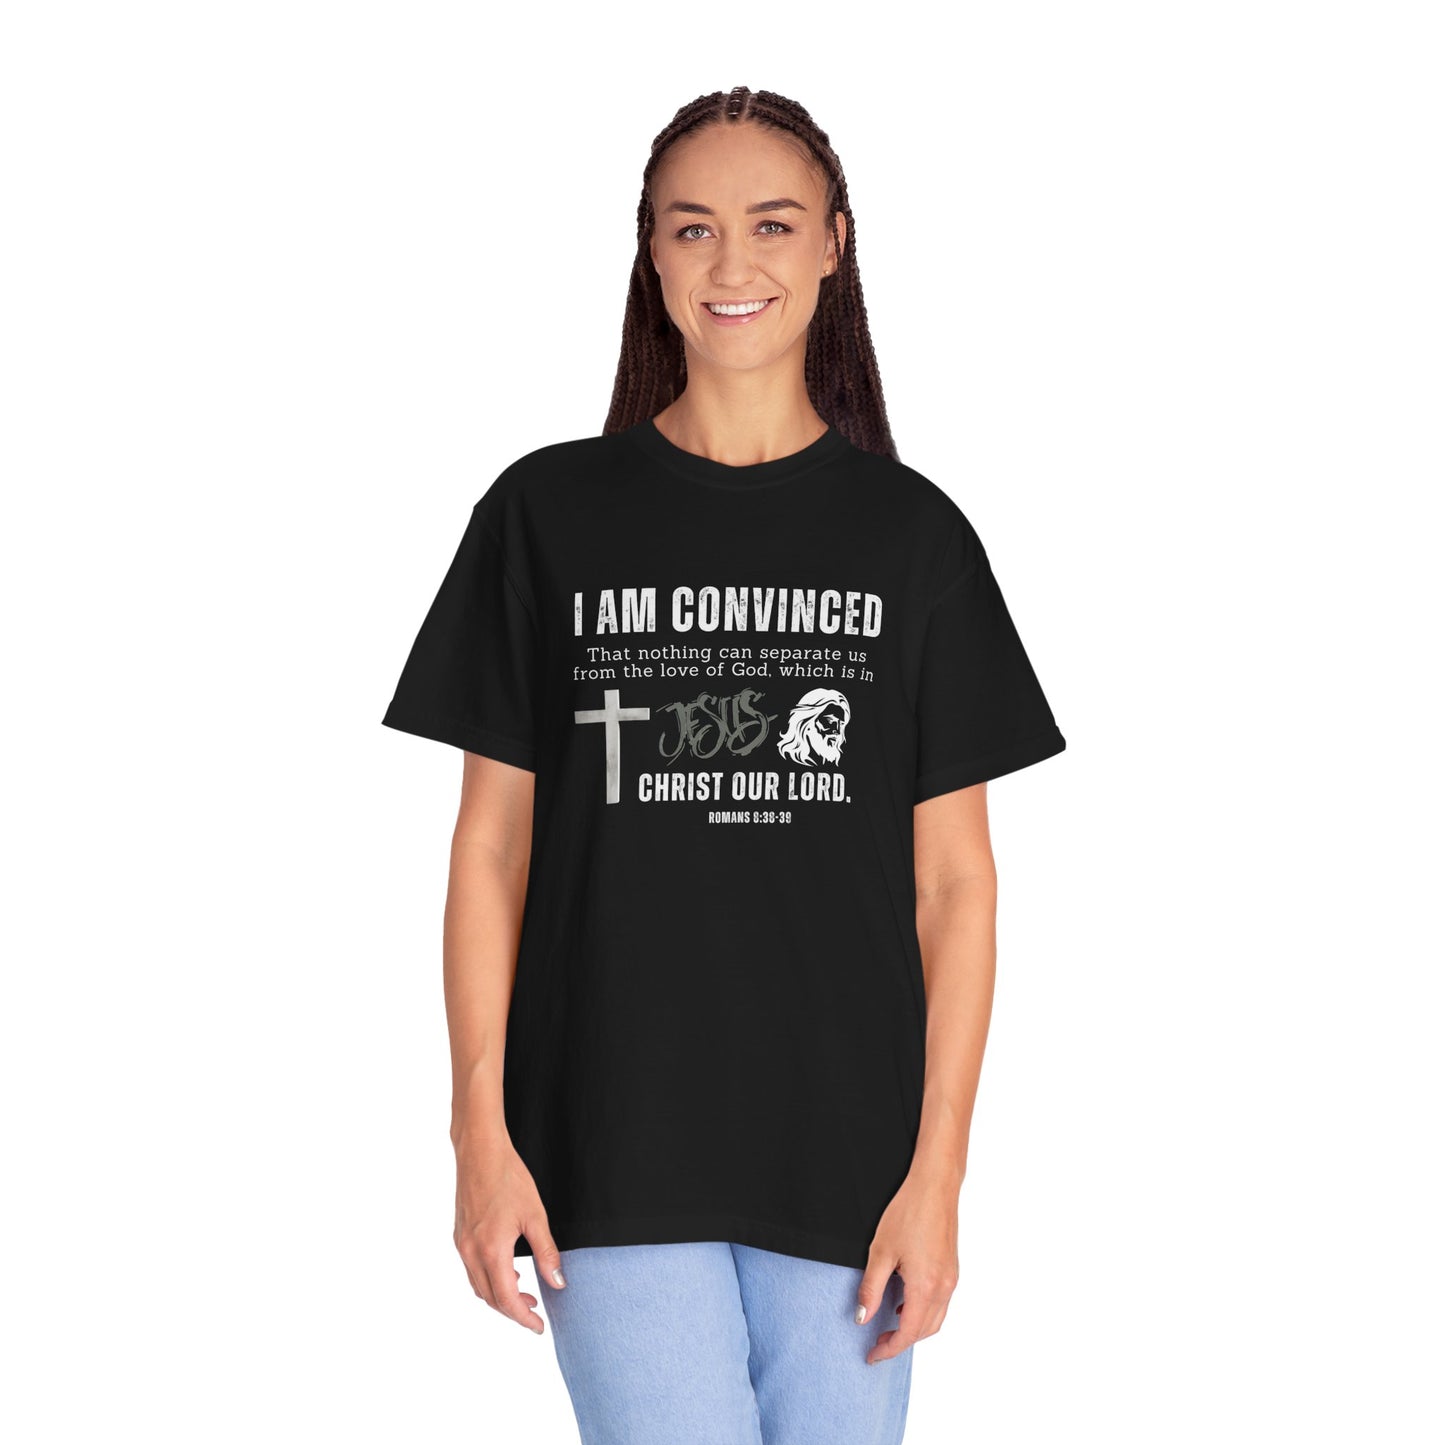 Romans 8:39 I am convinced, Garment-Dyed Christian T-shirt for Men and Women